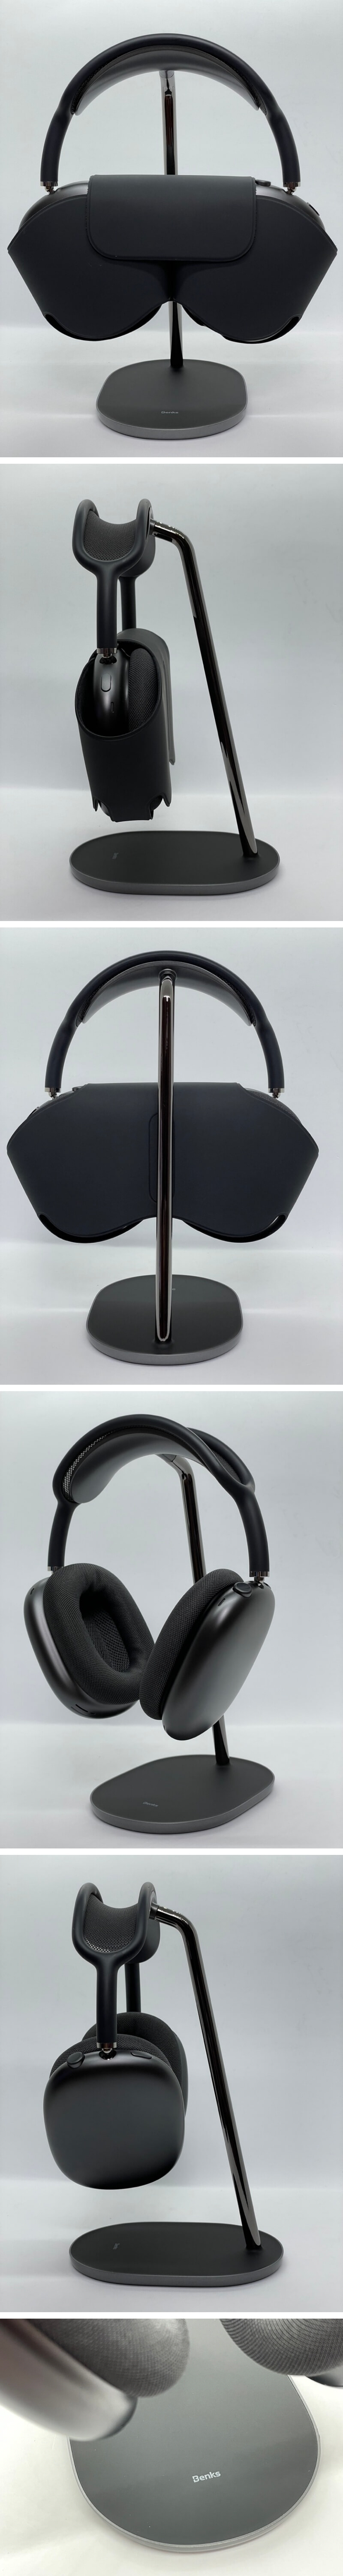 benks headphone stand with AirPods max